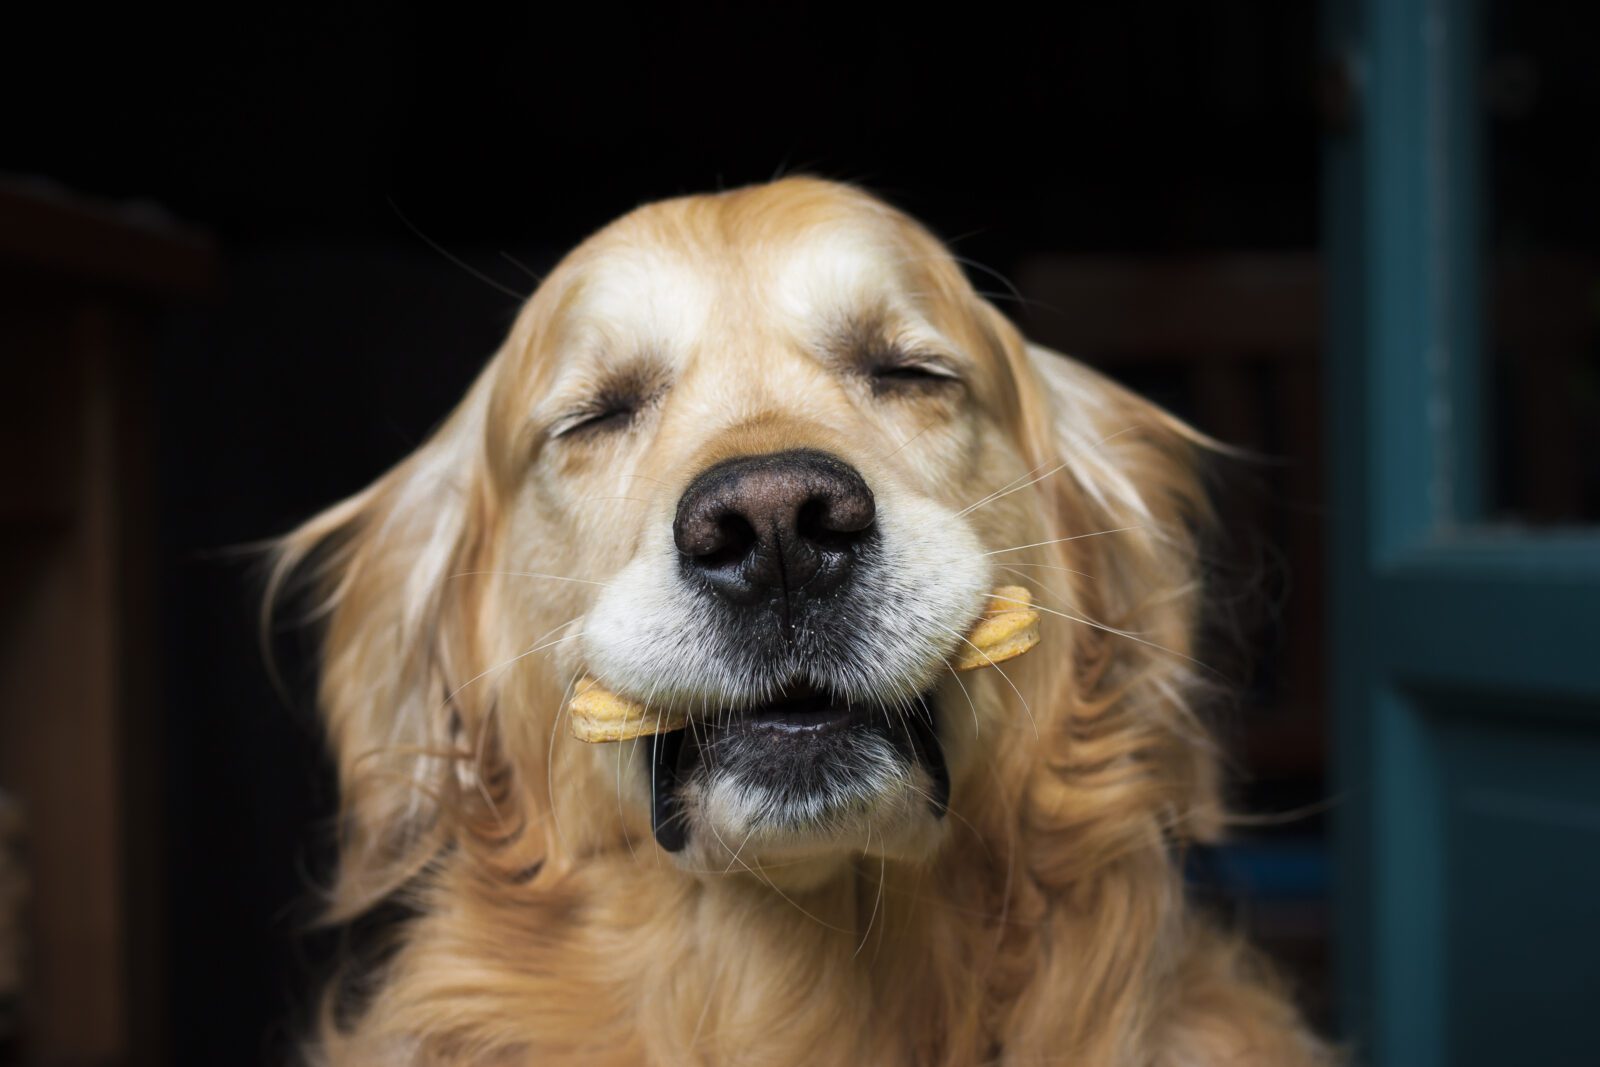 A Golden Retriever dog holding her doggy biscuit in her mouth, on dark background.